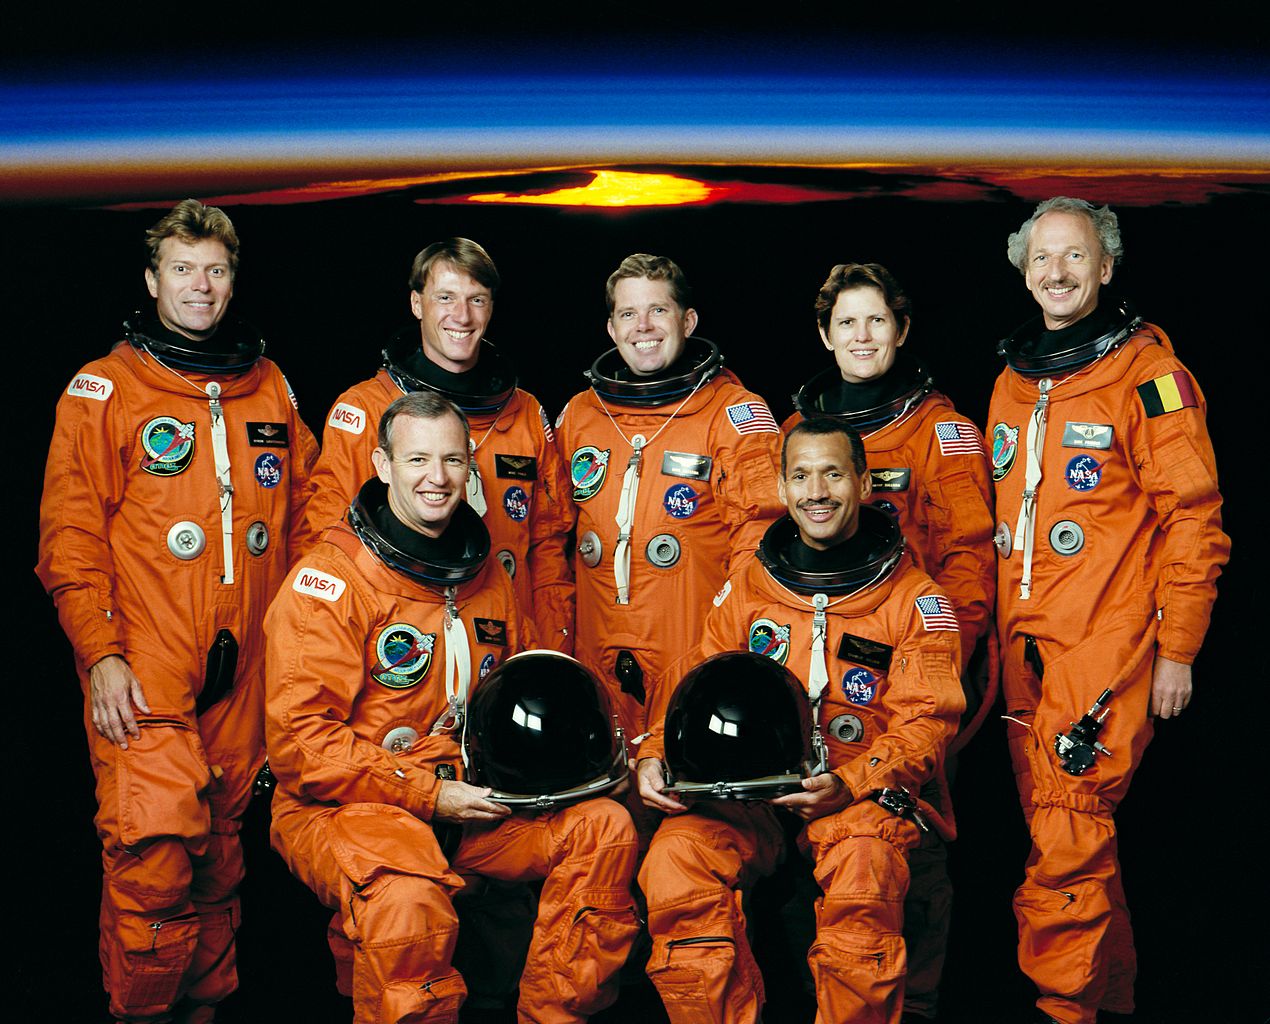 STS‑45 crew photo with, from left to right, in front: pilot Brian Duffy and commander Charles F. Bolden Jr.; backed by payload specialist Byron K. Lichtenberg, mission specialist C. Michael Foale, mission specialist David C. Leestma, payload commander Kathryn D. Sullivan and payload specialist Dirk D. Frimout. Image credit: NASA